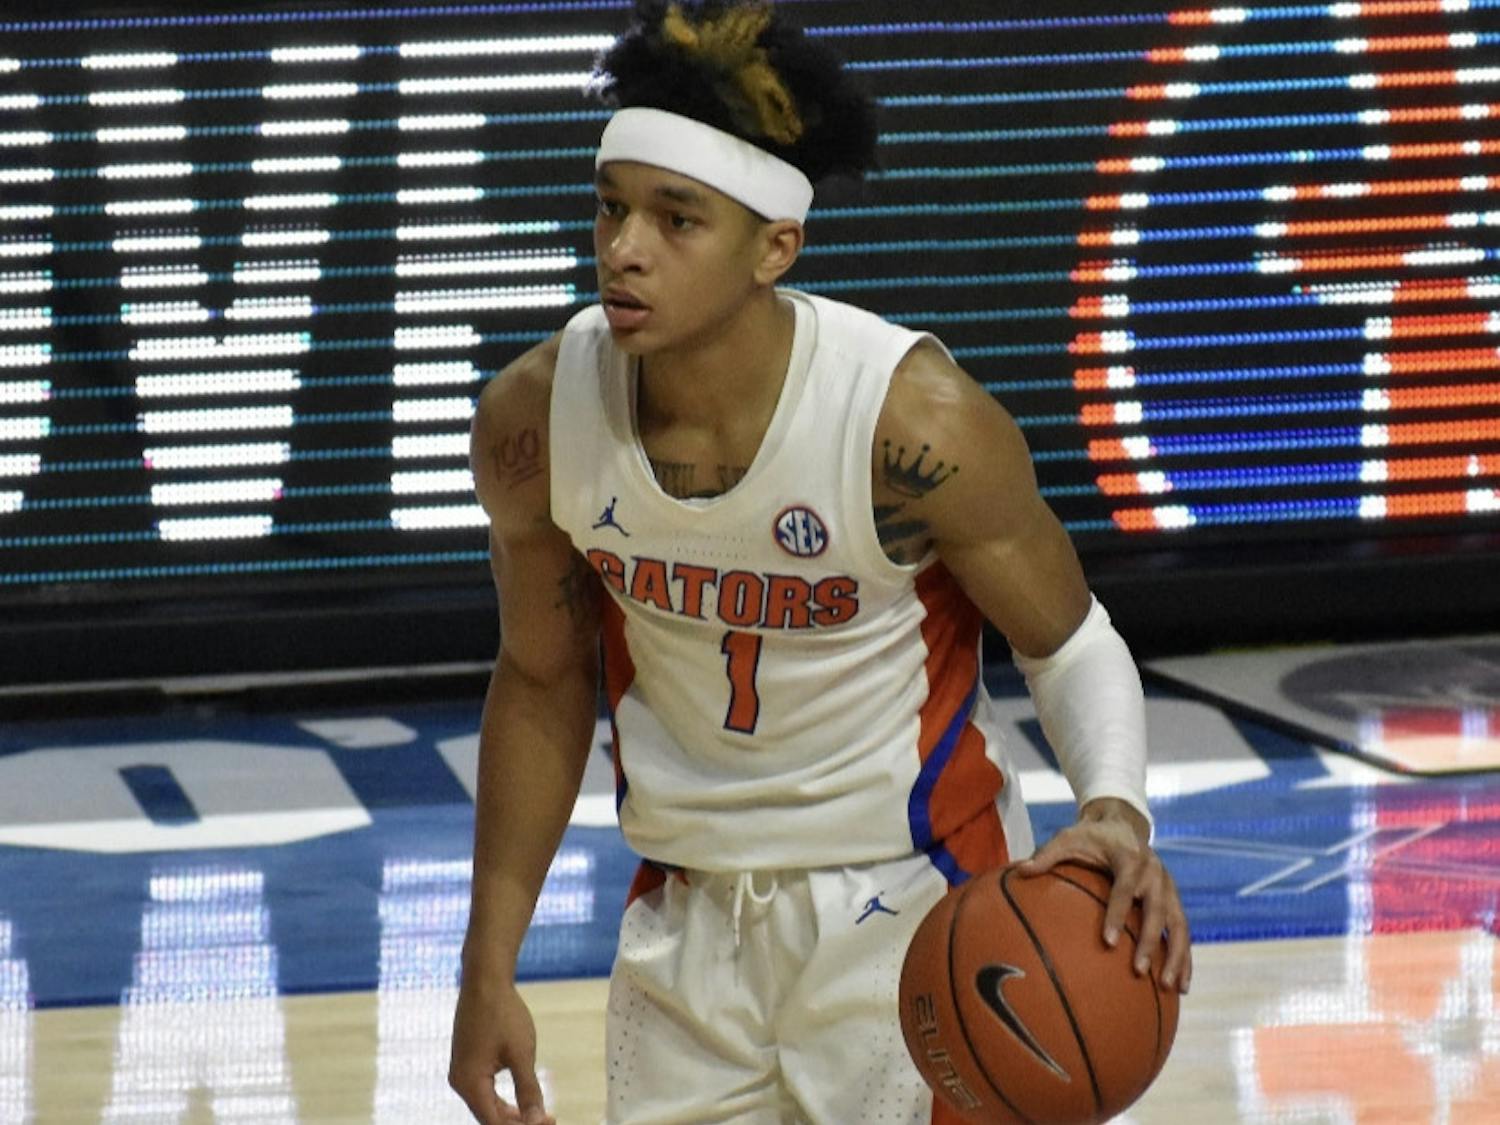 Florida's Tre Mann, who led the Gators with 16.0 points per game in 2020-21, was drafted by the Oklahoma City Thunder 18th overall in Thursday's NBA Draft.